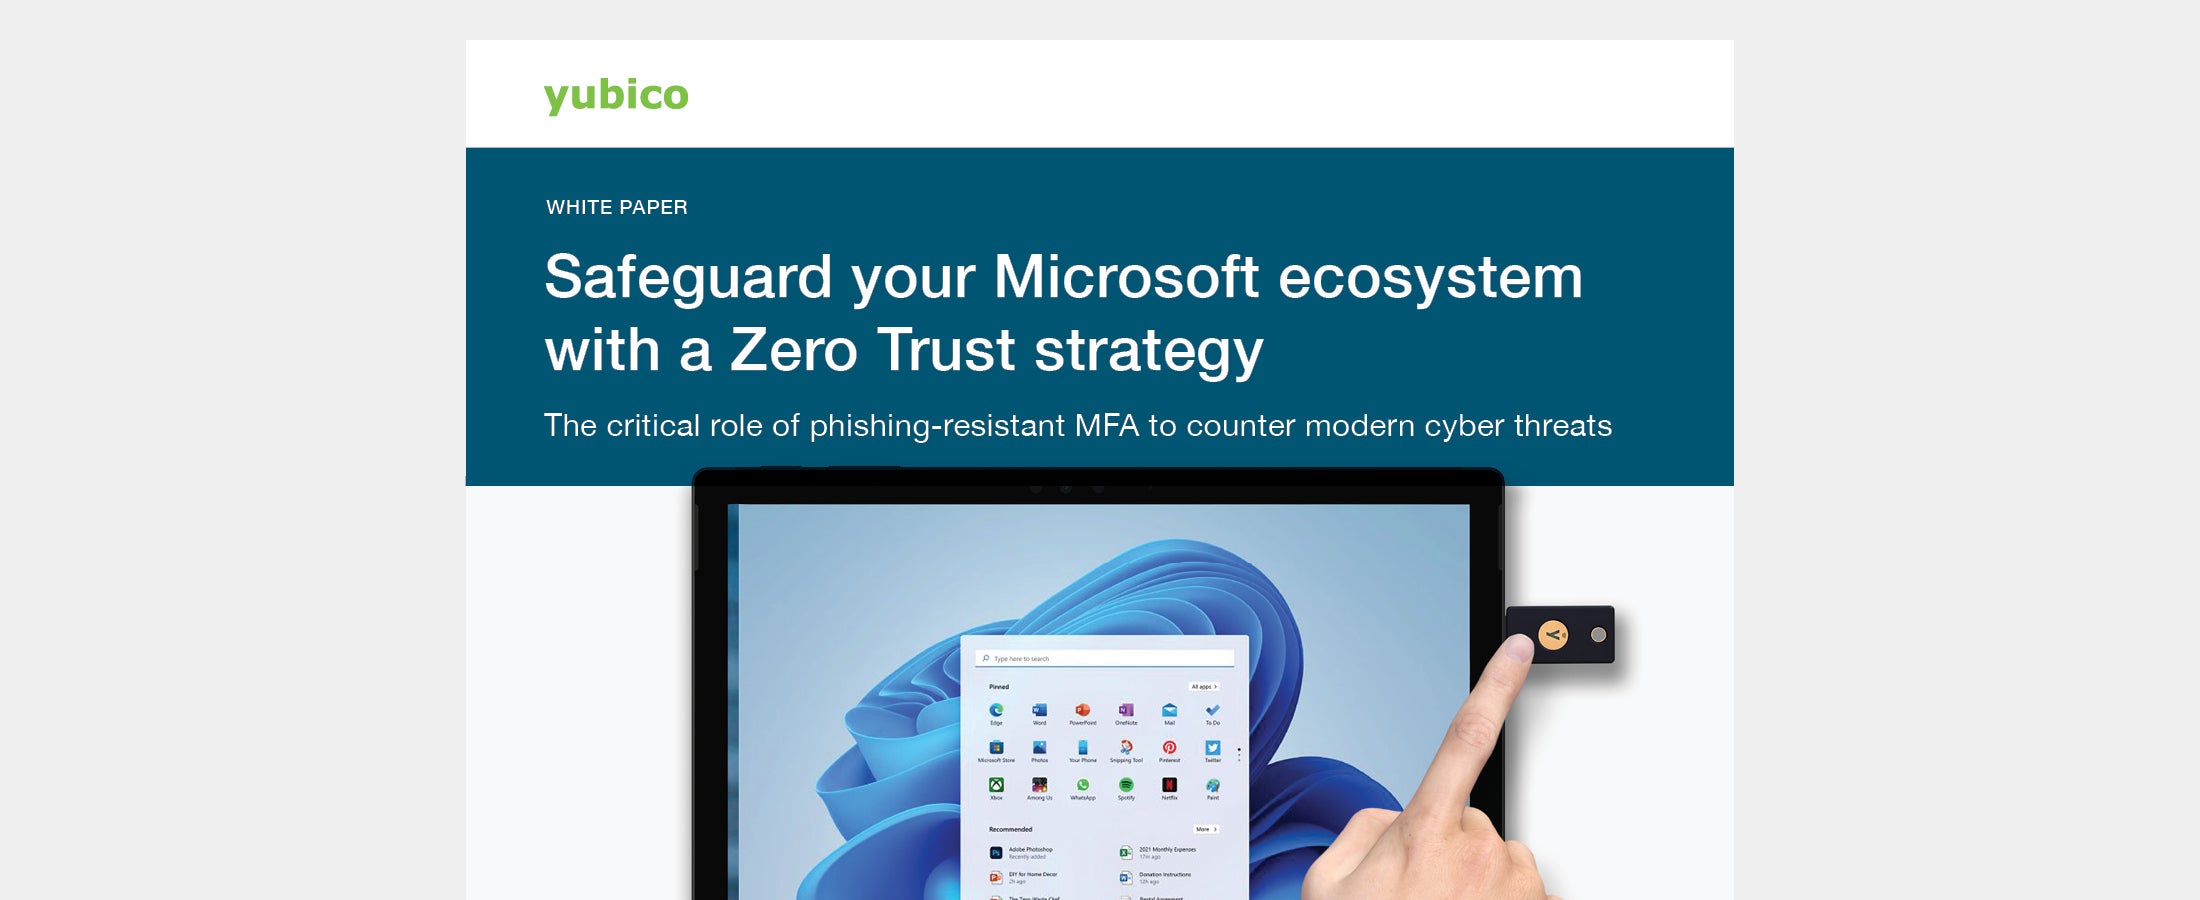 Secure you Microsoft environment featured image